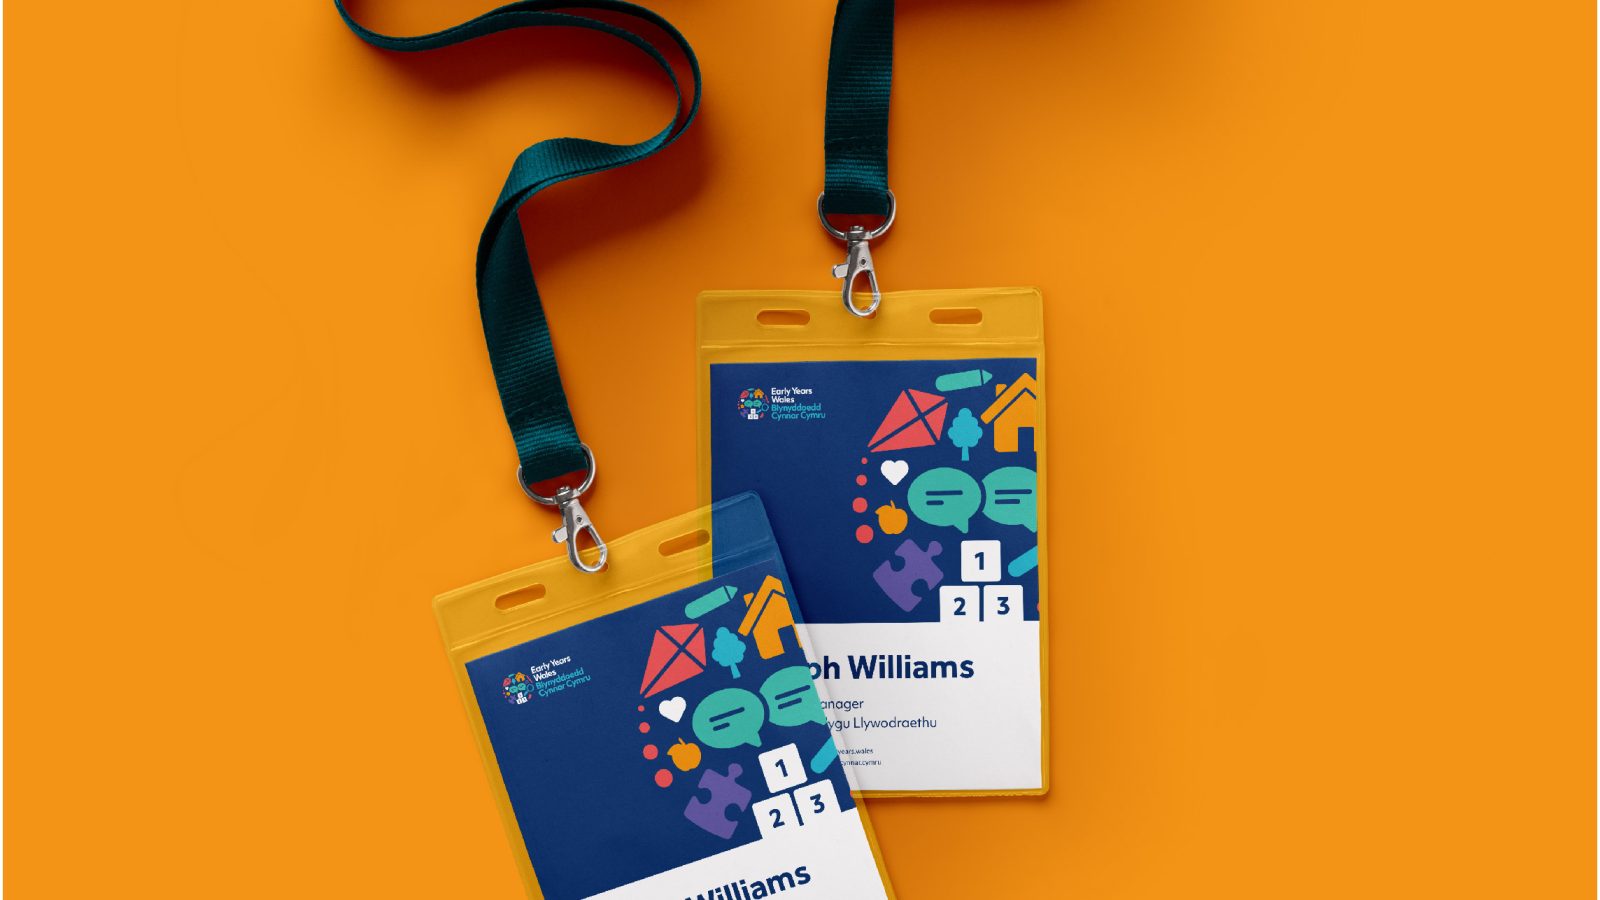 Three conference badges with lanyards on an orange background, featuring names and QR codes, designed by a Design Agency UK in blue and orange with graphical elements.